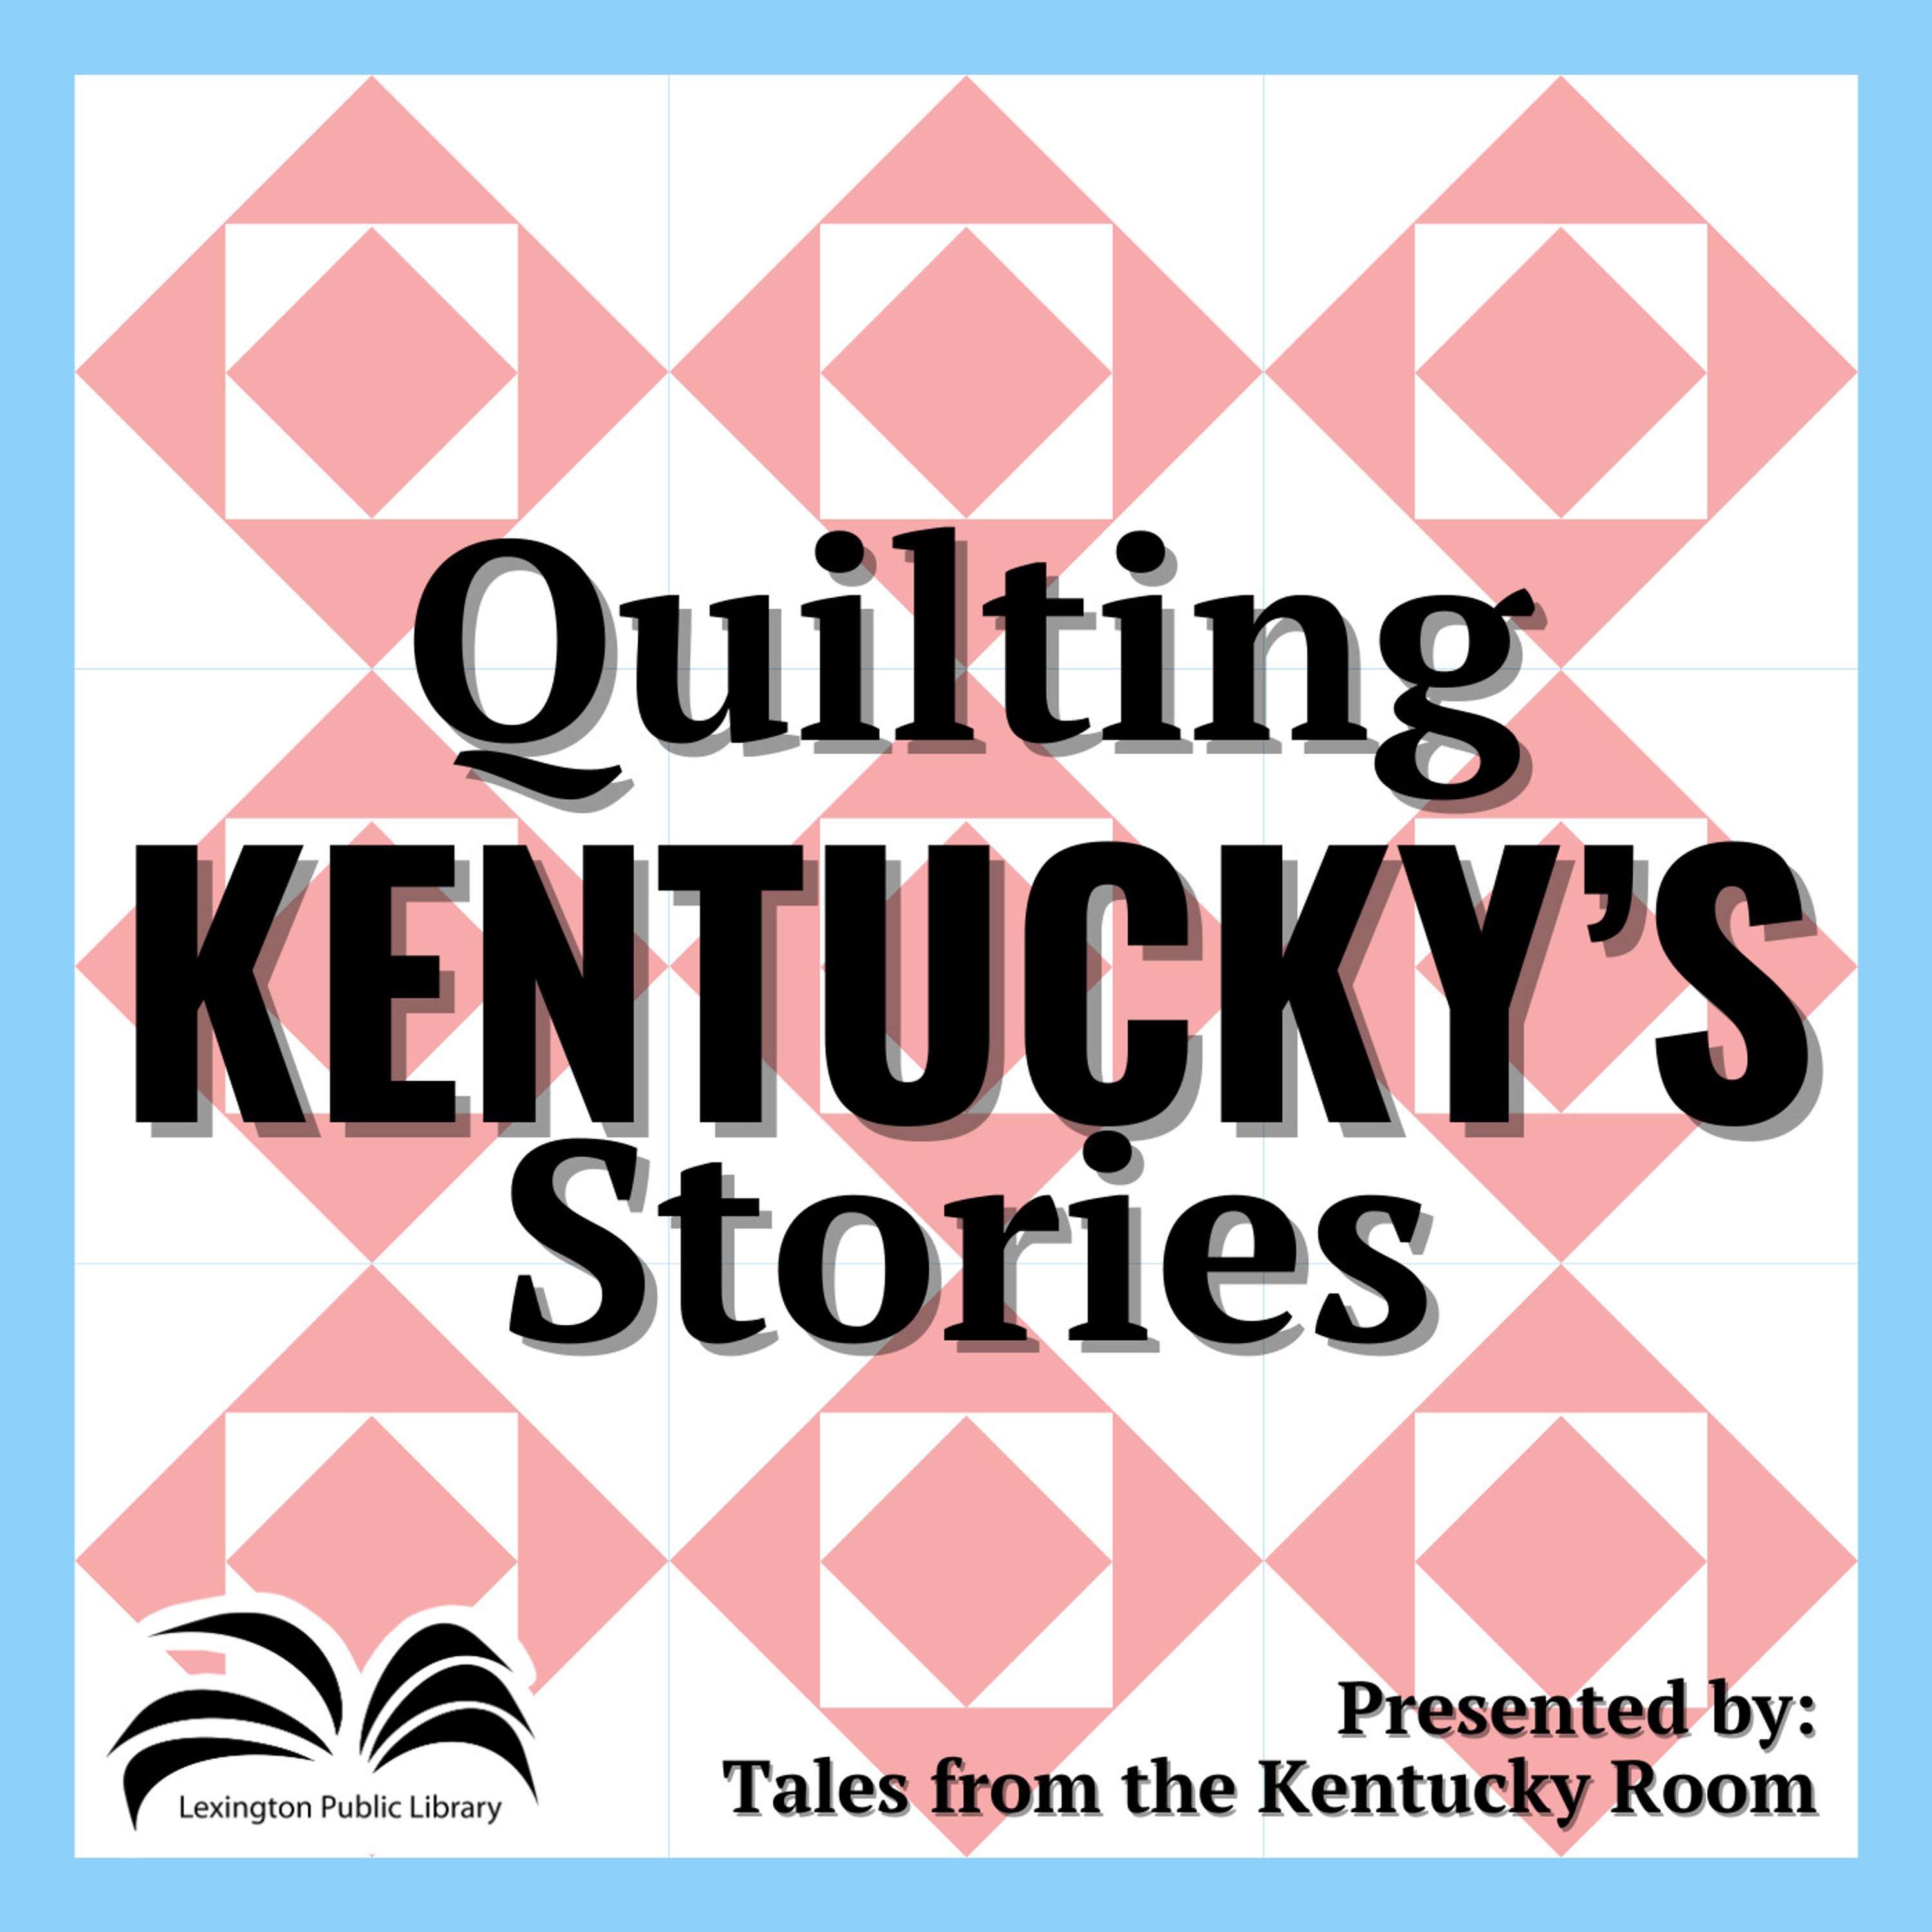 Coming Soon: Quilting Kentucky's Stories